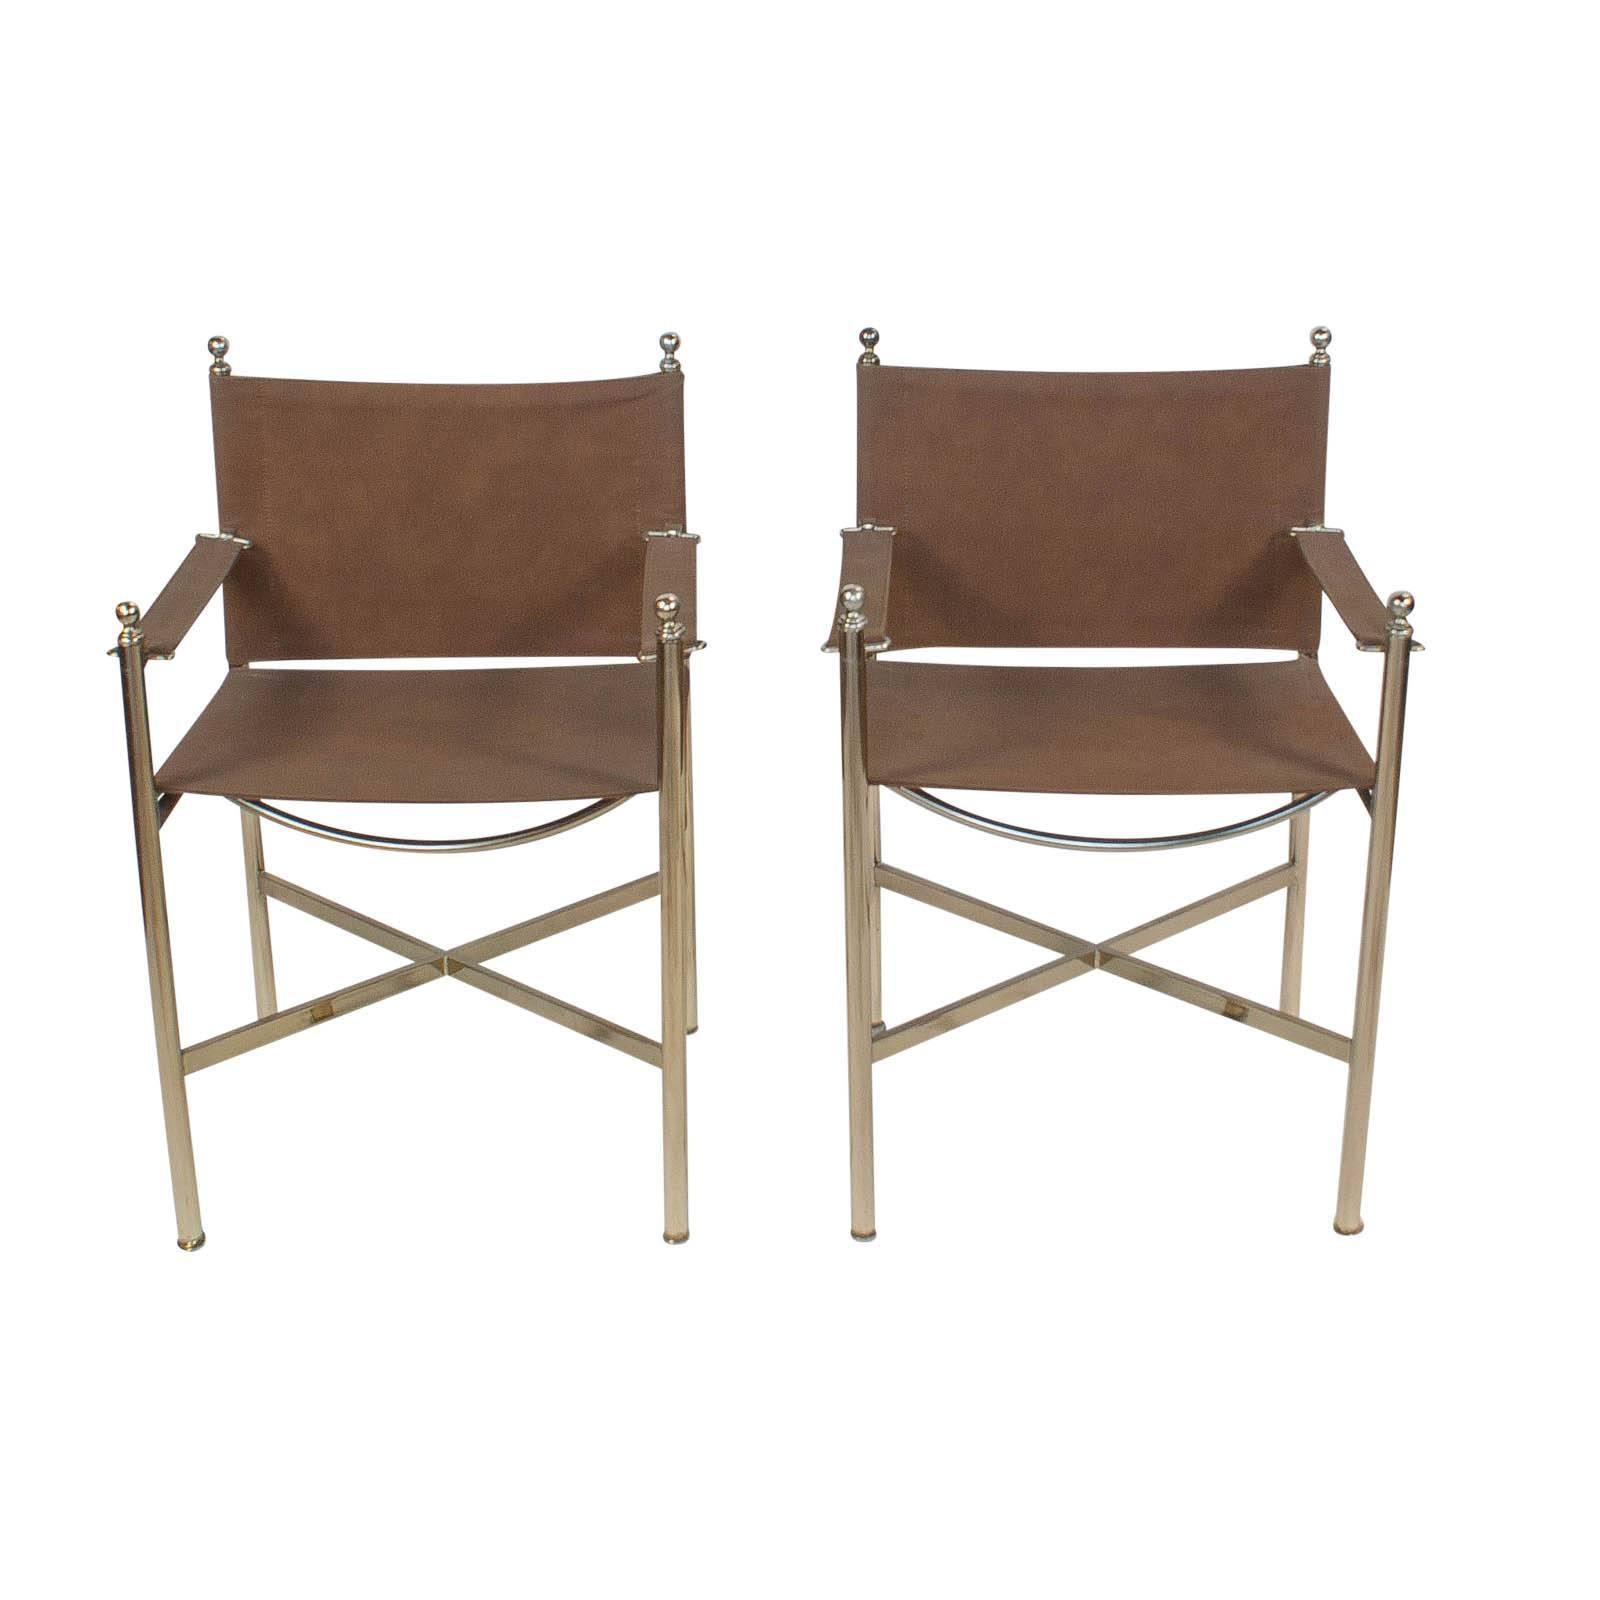 A pair of steel and brass directors chairs attributed to the French firm of Jansen circa 1950. Priced as pairs. Another pair available. Suede upholstery probably 20 years old but in good condition.